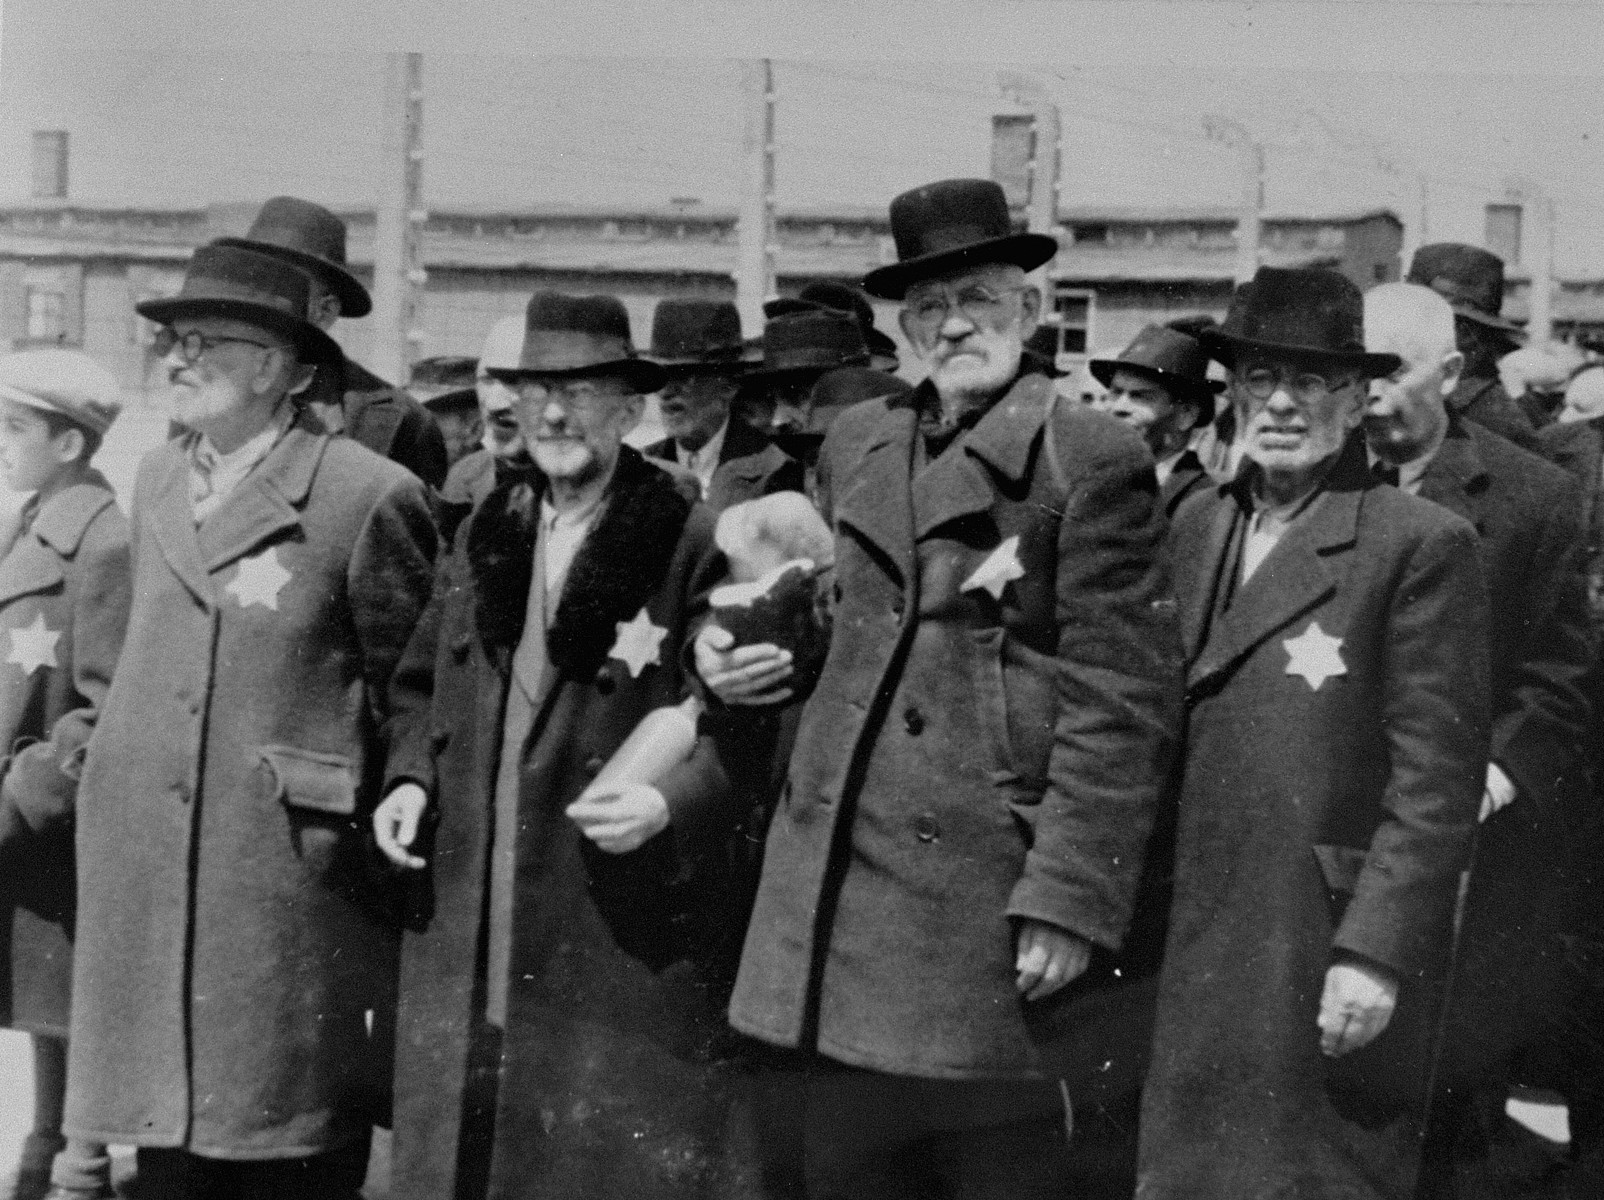 Jewish men from Subcarpathian Rus await selection on the ramp at Auschwitz-Birkenau
 
Those pictured include Mano Goldstein of Diosgyor (second from left), Yitzchak Ignac of Diosgyor (third from left) and Israel Orenstein of Tacovo (far right).  Israel Orenstein survived.